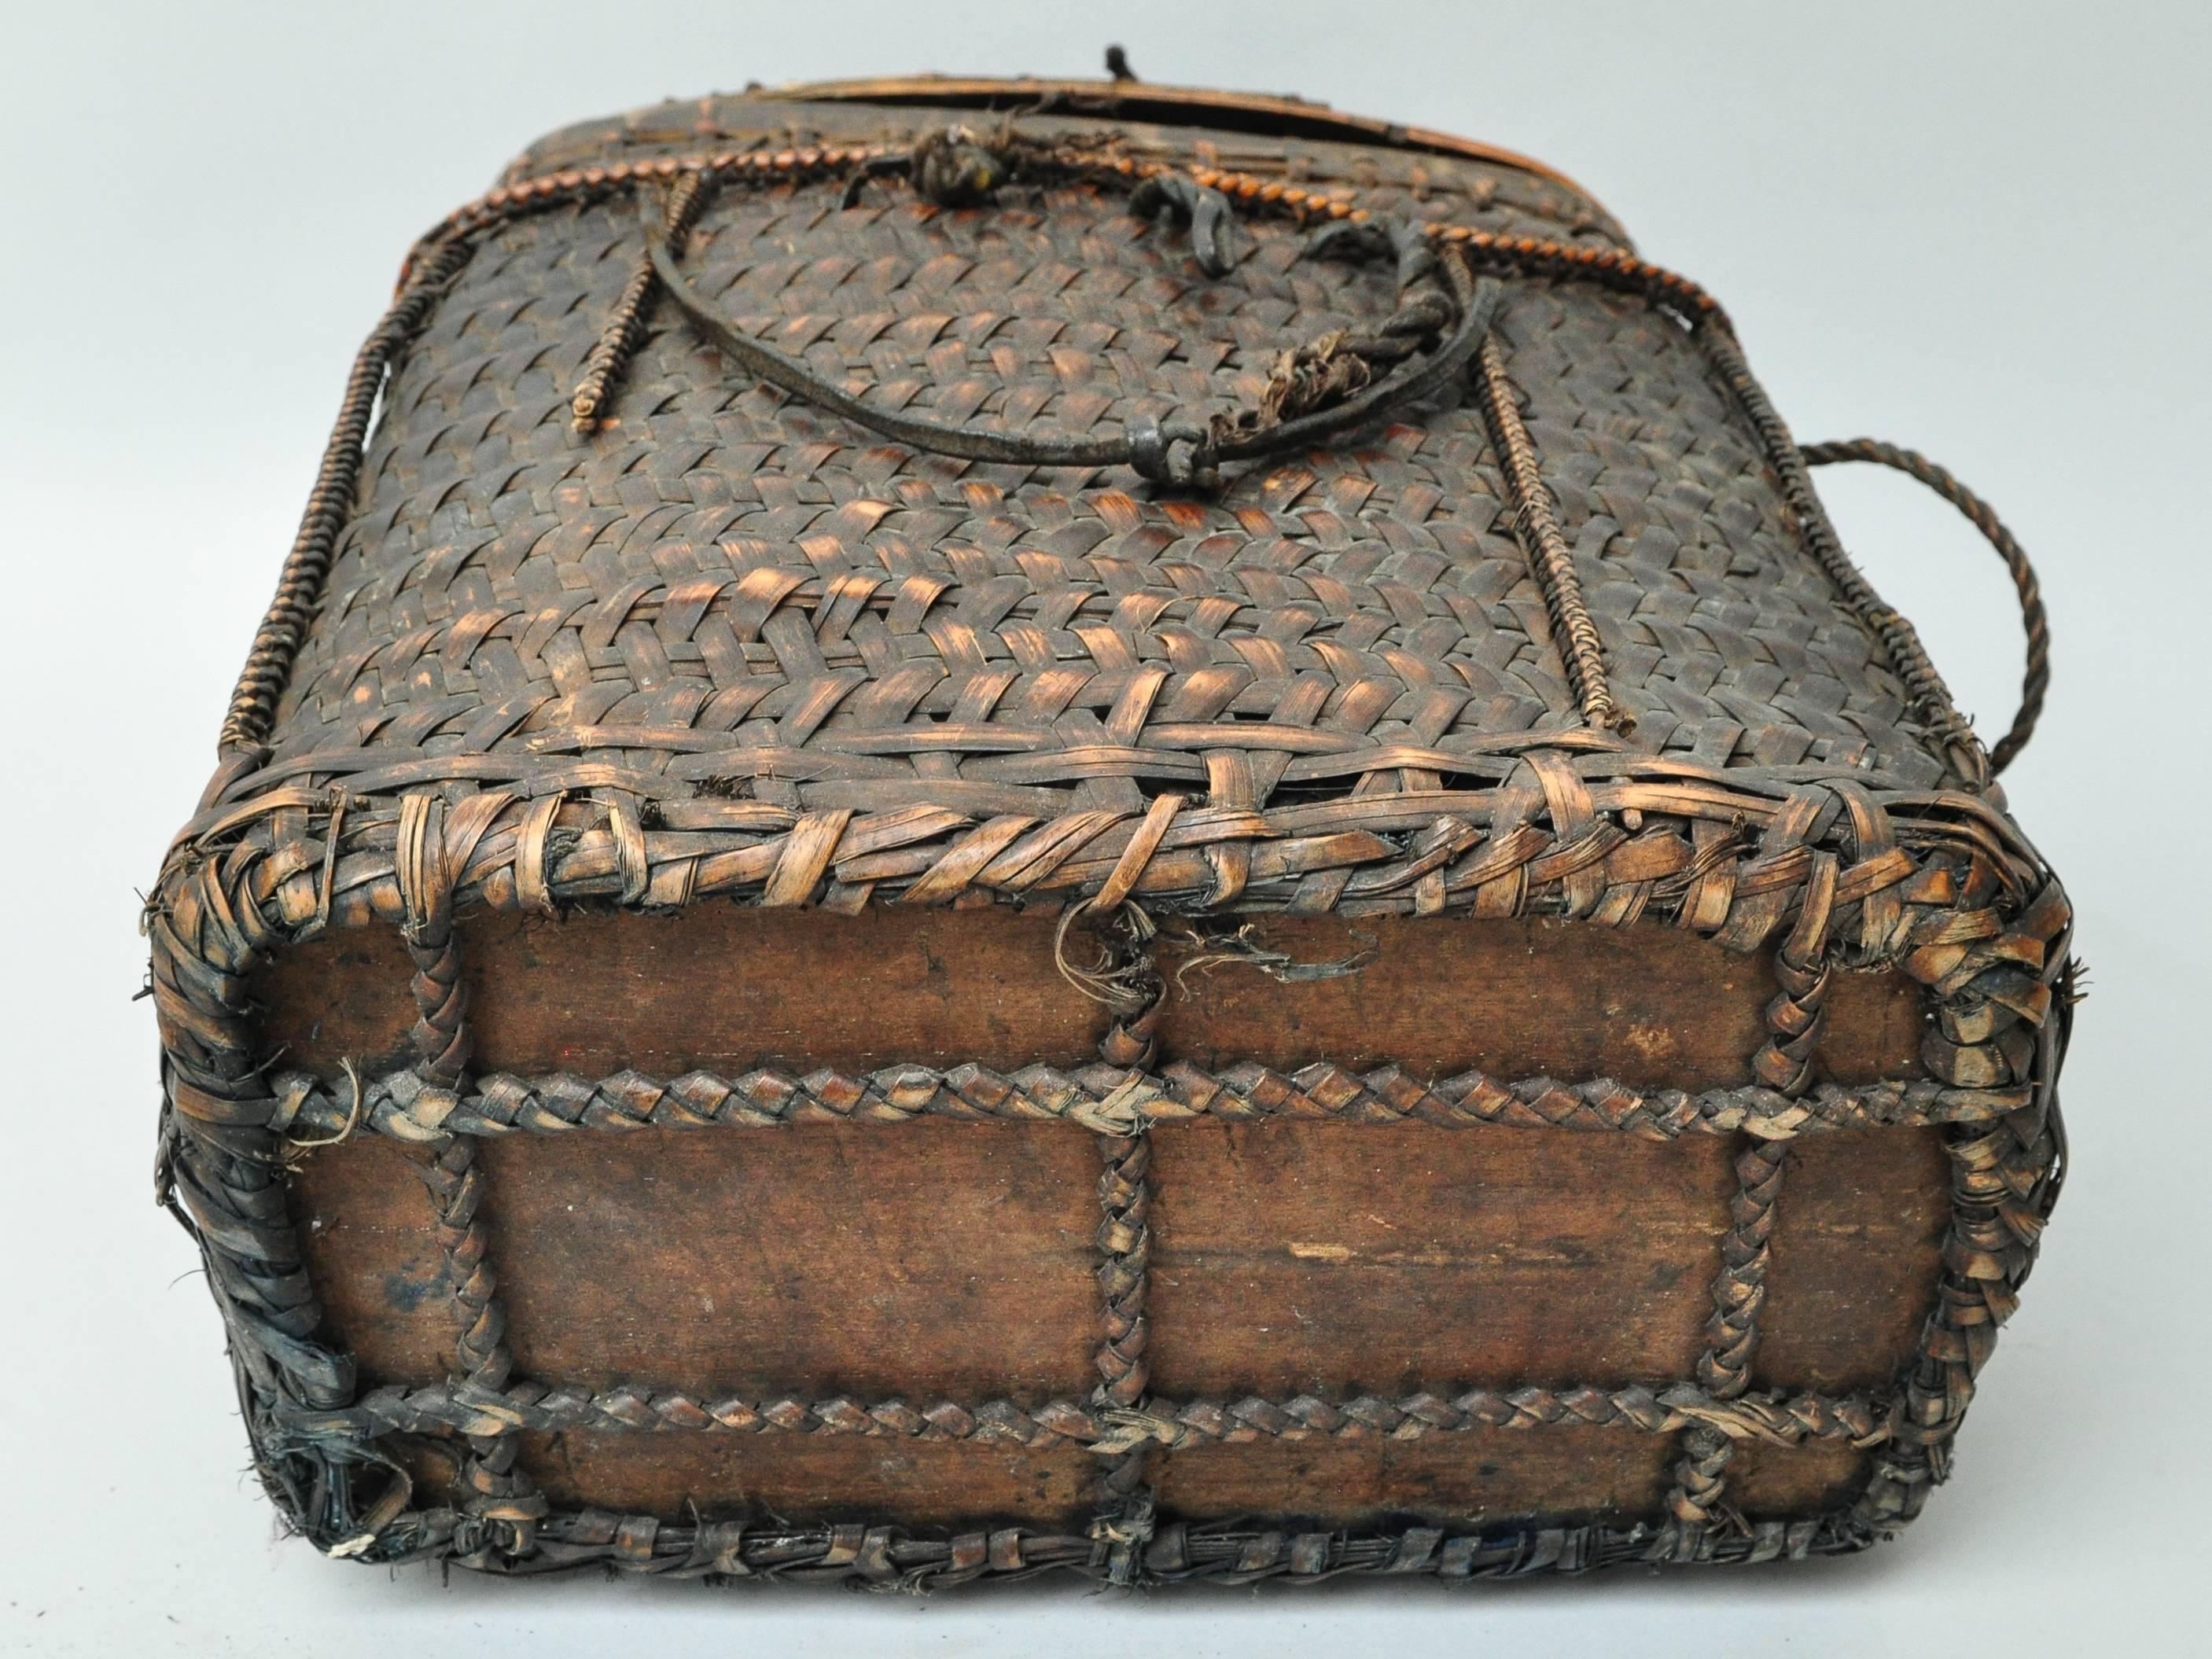 Hand-Crafted Tribal Storage and Carrying Basket with Lid from Bhutan, Mid-Late 20th Century